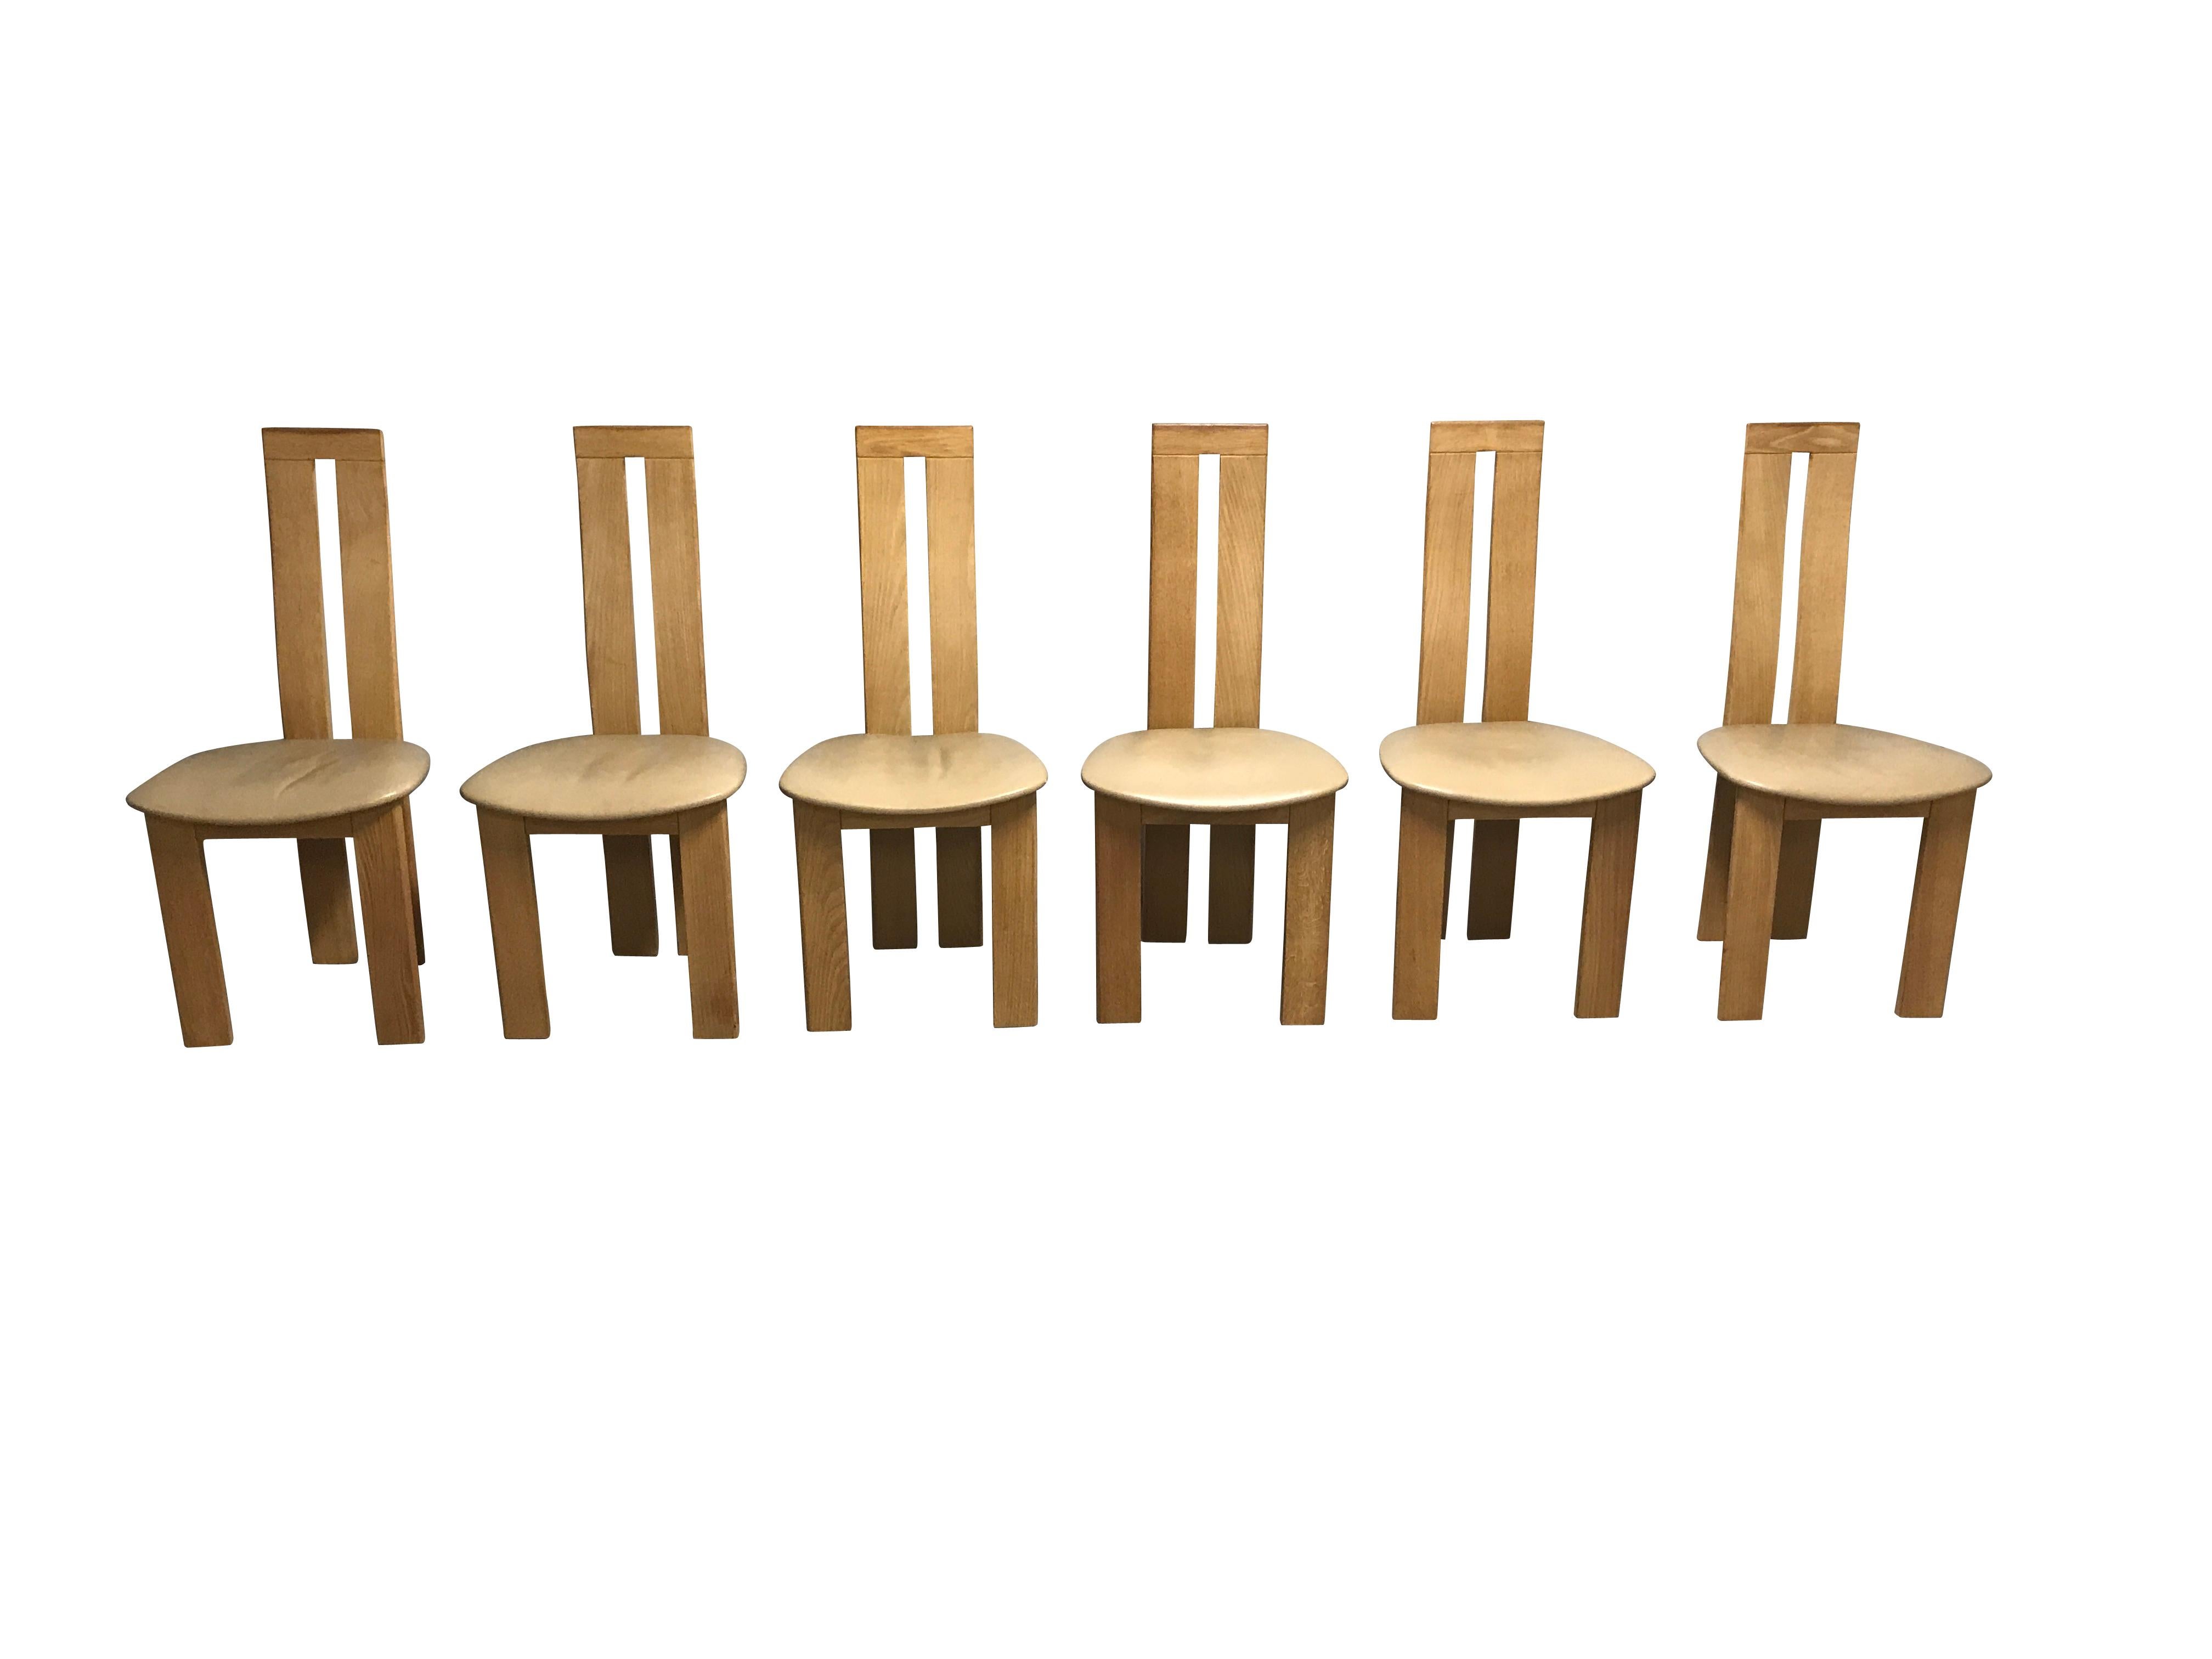 Set of six Postmodern clear wooden and beige leather dining chairs designed by Pietro Costantini for Ello.

The chairs have a beautiful design and have an elegant bended wooden backrest.

Very good condition.

A 7th identical chair is